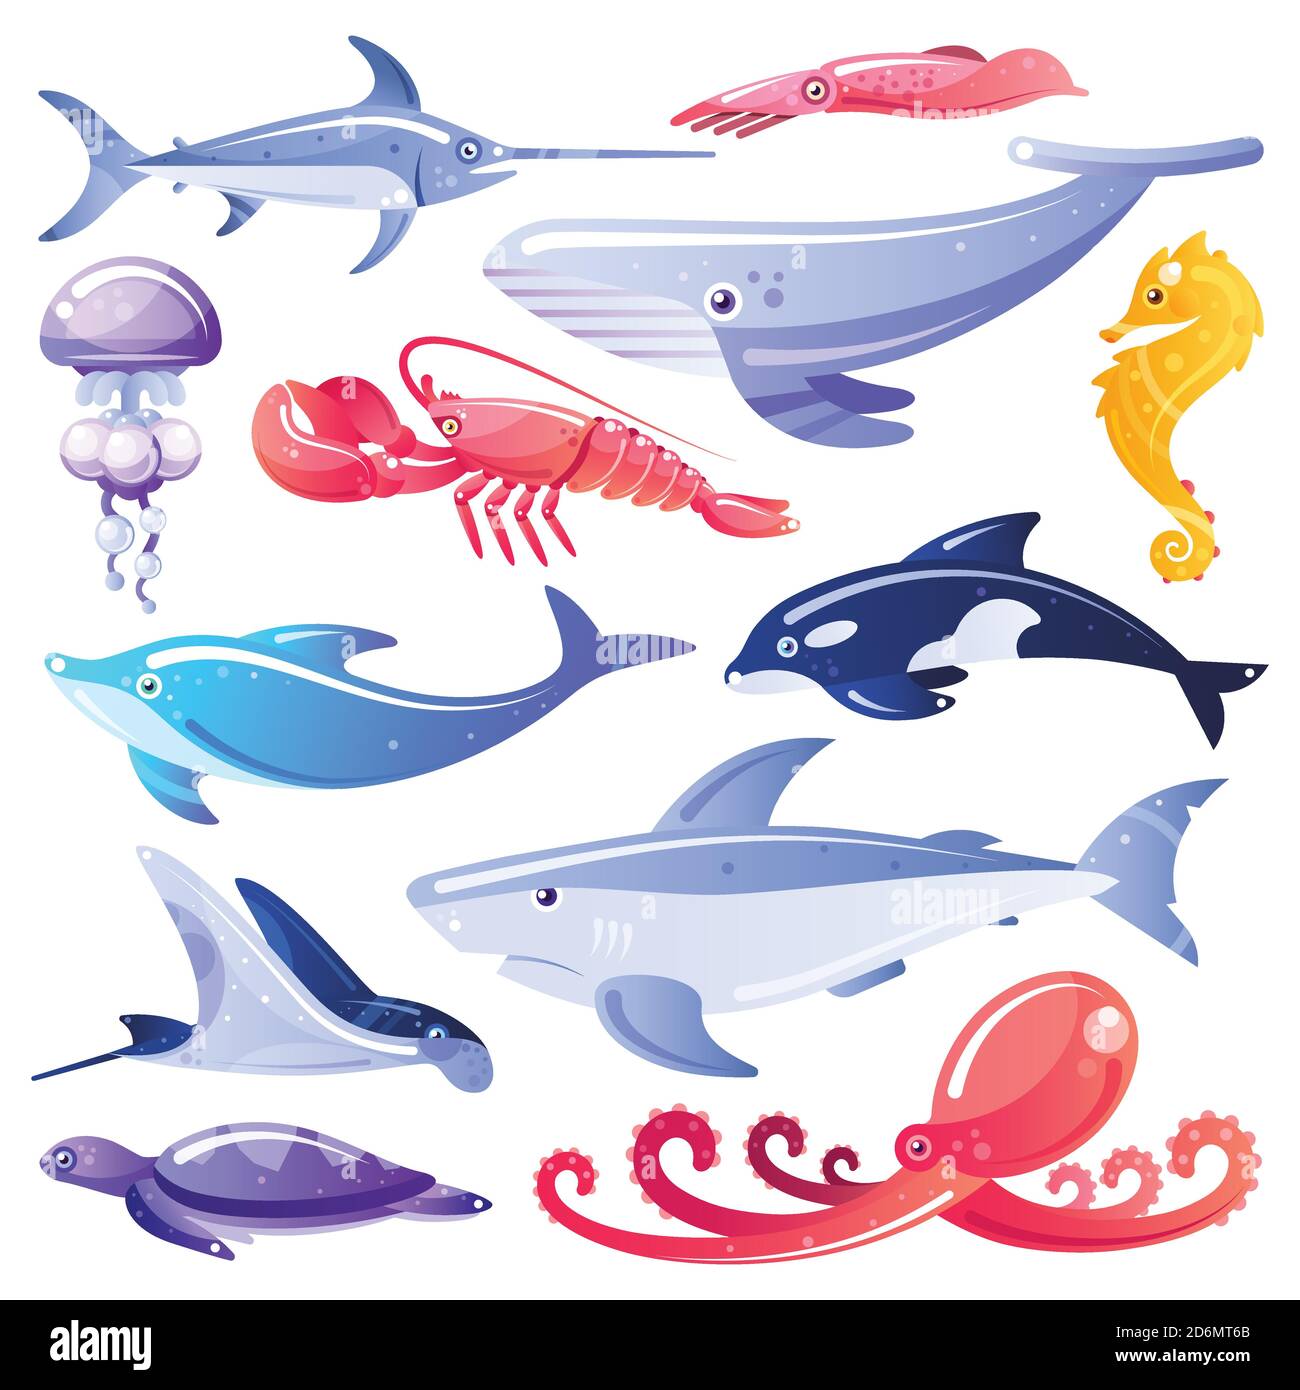 Sea animals and fishes vector cartoon illustration. Marine life design elements. Ocean dwellers isolated on white background. Stock Vector